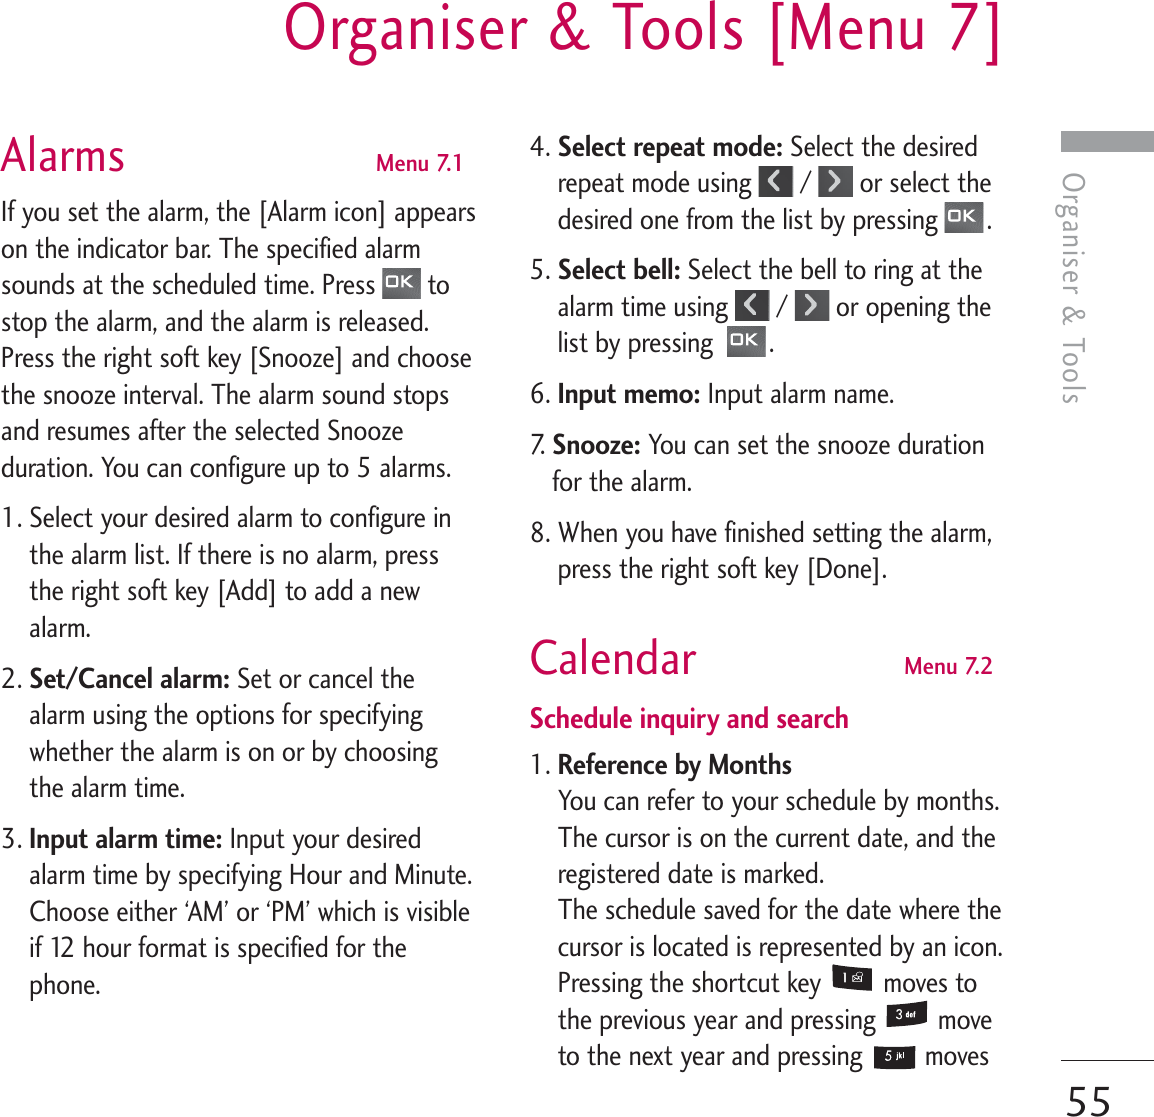 Organiser &amp; ToolsOrganiser &amp; Tools [Menu 7]55Alarms  Menu 7.1If you set the alarm, the [Alarm icon] appearson the indicator bar. The specified alarmsounds at the scheduled time. Press  tostop the alarm, and the alarm is released.Press the right soft key [Snooze] and choosethe snooze interval. The alarm sound stopsand resumes after the selected Snoozeduration. You can configure up to 5 alarms.1. Select your desired alarm to configure inthe alarm list. If there is no alarm, pressthe right soft key [Add] to add a newalarm.2. Set/Cancel alarm: Set or cancel thealarm using the options for specifyingwhether the alarm is on or by choosingthe alarm time.3. Input alarm time: Input your desiredalarm time by specifying Hour and Minute.Choose either ‘AM’ or ‘PM’ which is visibleif 12 hour format is specified for thephone.4. Select repeat mode: Select the desiredrepeat mode using  /  or select thedesired one from the list by pressing  .5. Select bell: Select the bell to ring at thealarm time using  /  or opening thelist by pressing   .6. Input memo: Input alarm name.7.   Snooze: You can set the snooze durationfor the alarm.8. When you have finished setting the alarm,press the right soft key [Done].Calendar  Menu 7.2Schedule inquiry and search1. Reference by MonthsYou can refer to your schedule by months.The cursor is on the current date, and theregistered date is marked. The schedule saved for the date where thecursor is located is represented by an icon.Pressing the shortcut key  moves tothe previous year and pressing  moveto the next year and pressing  moves